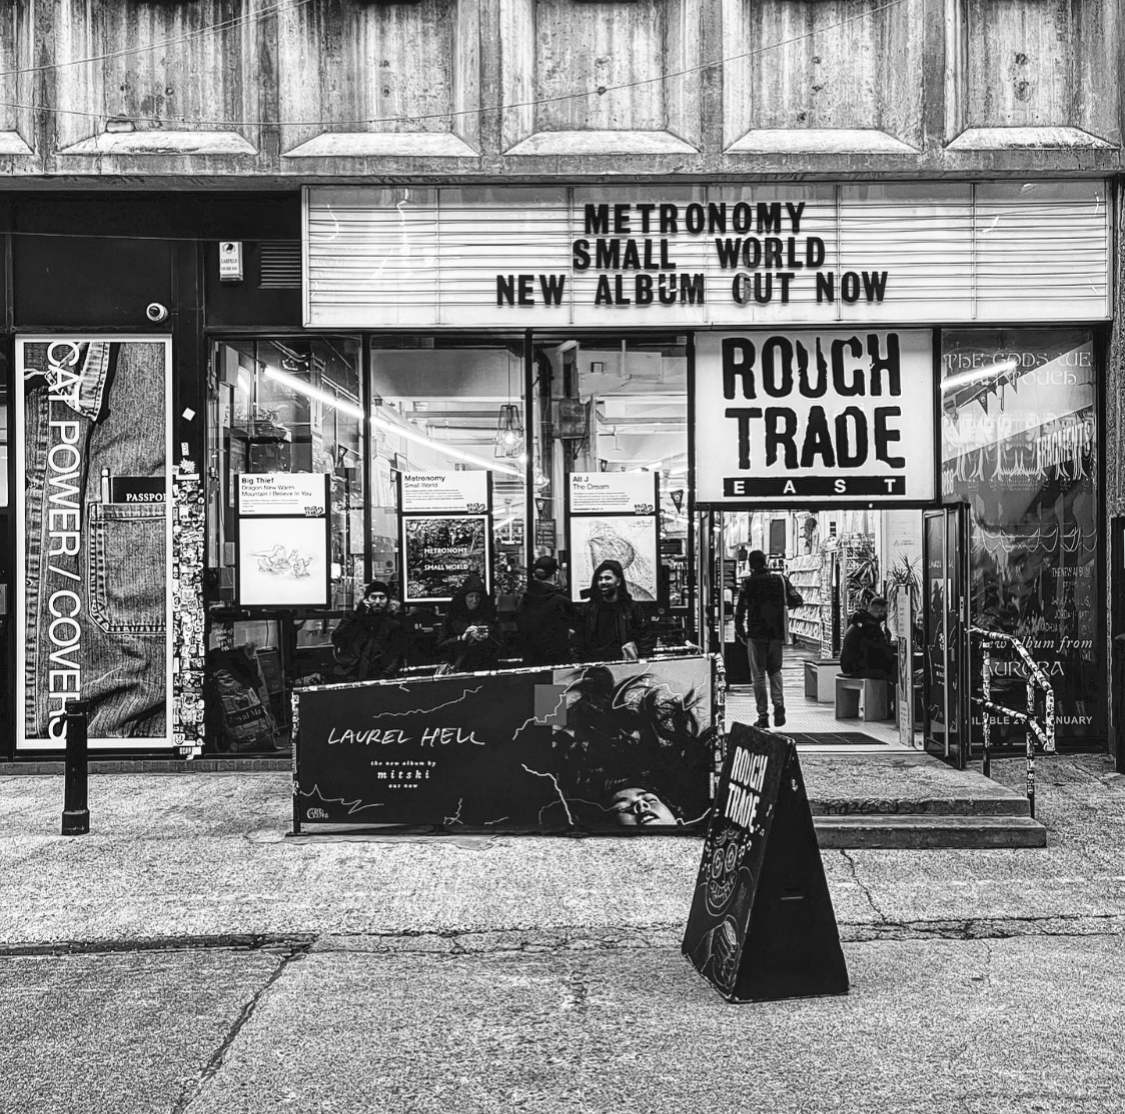 Rough Trade East - 3 of 3